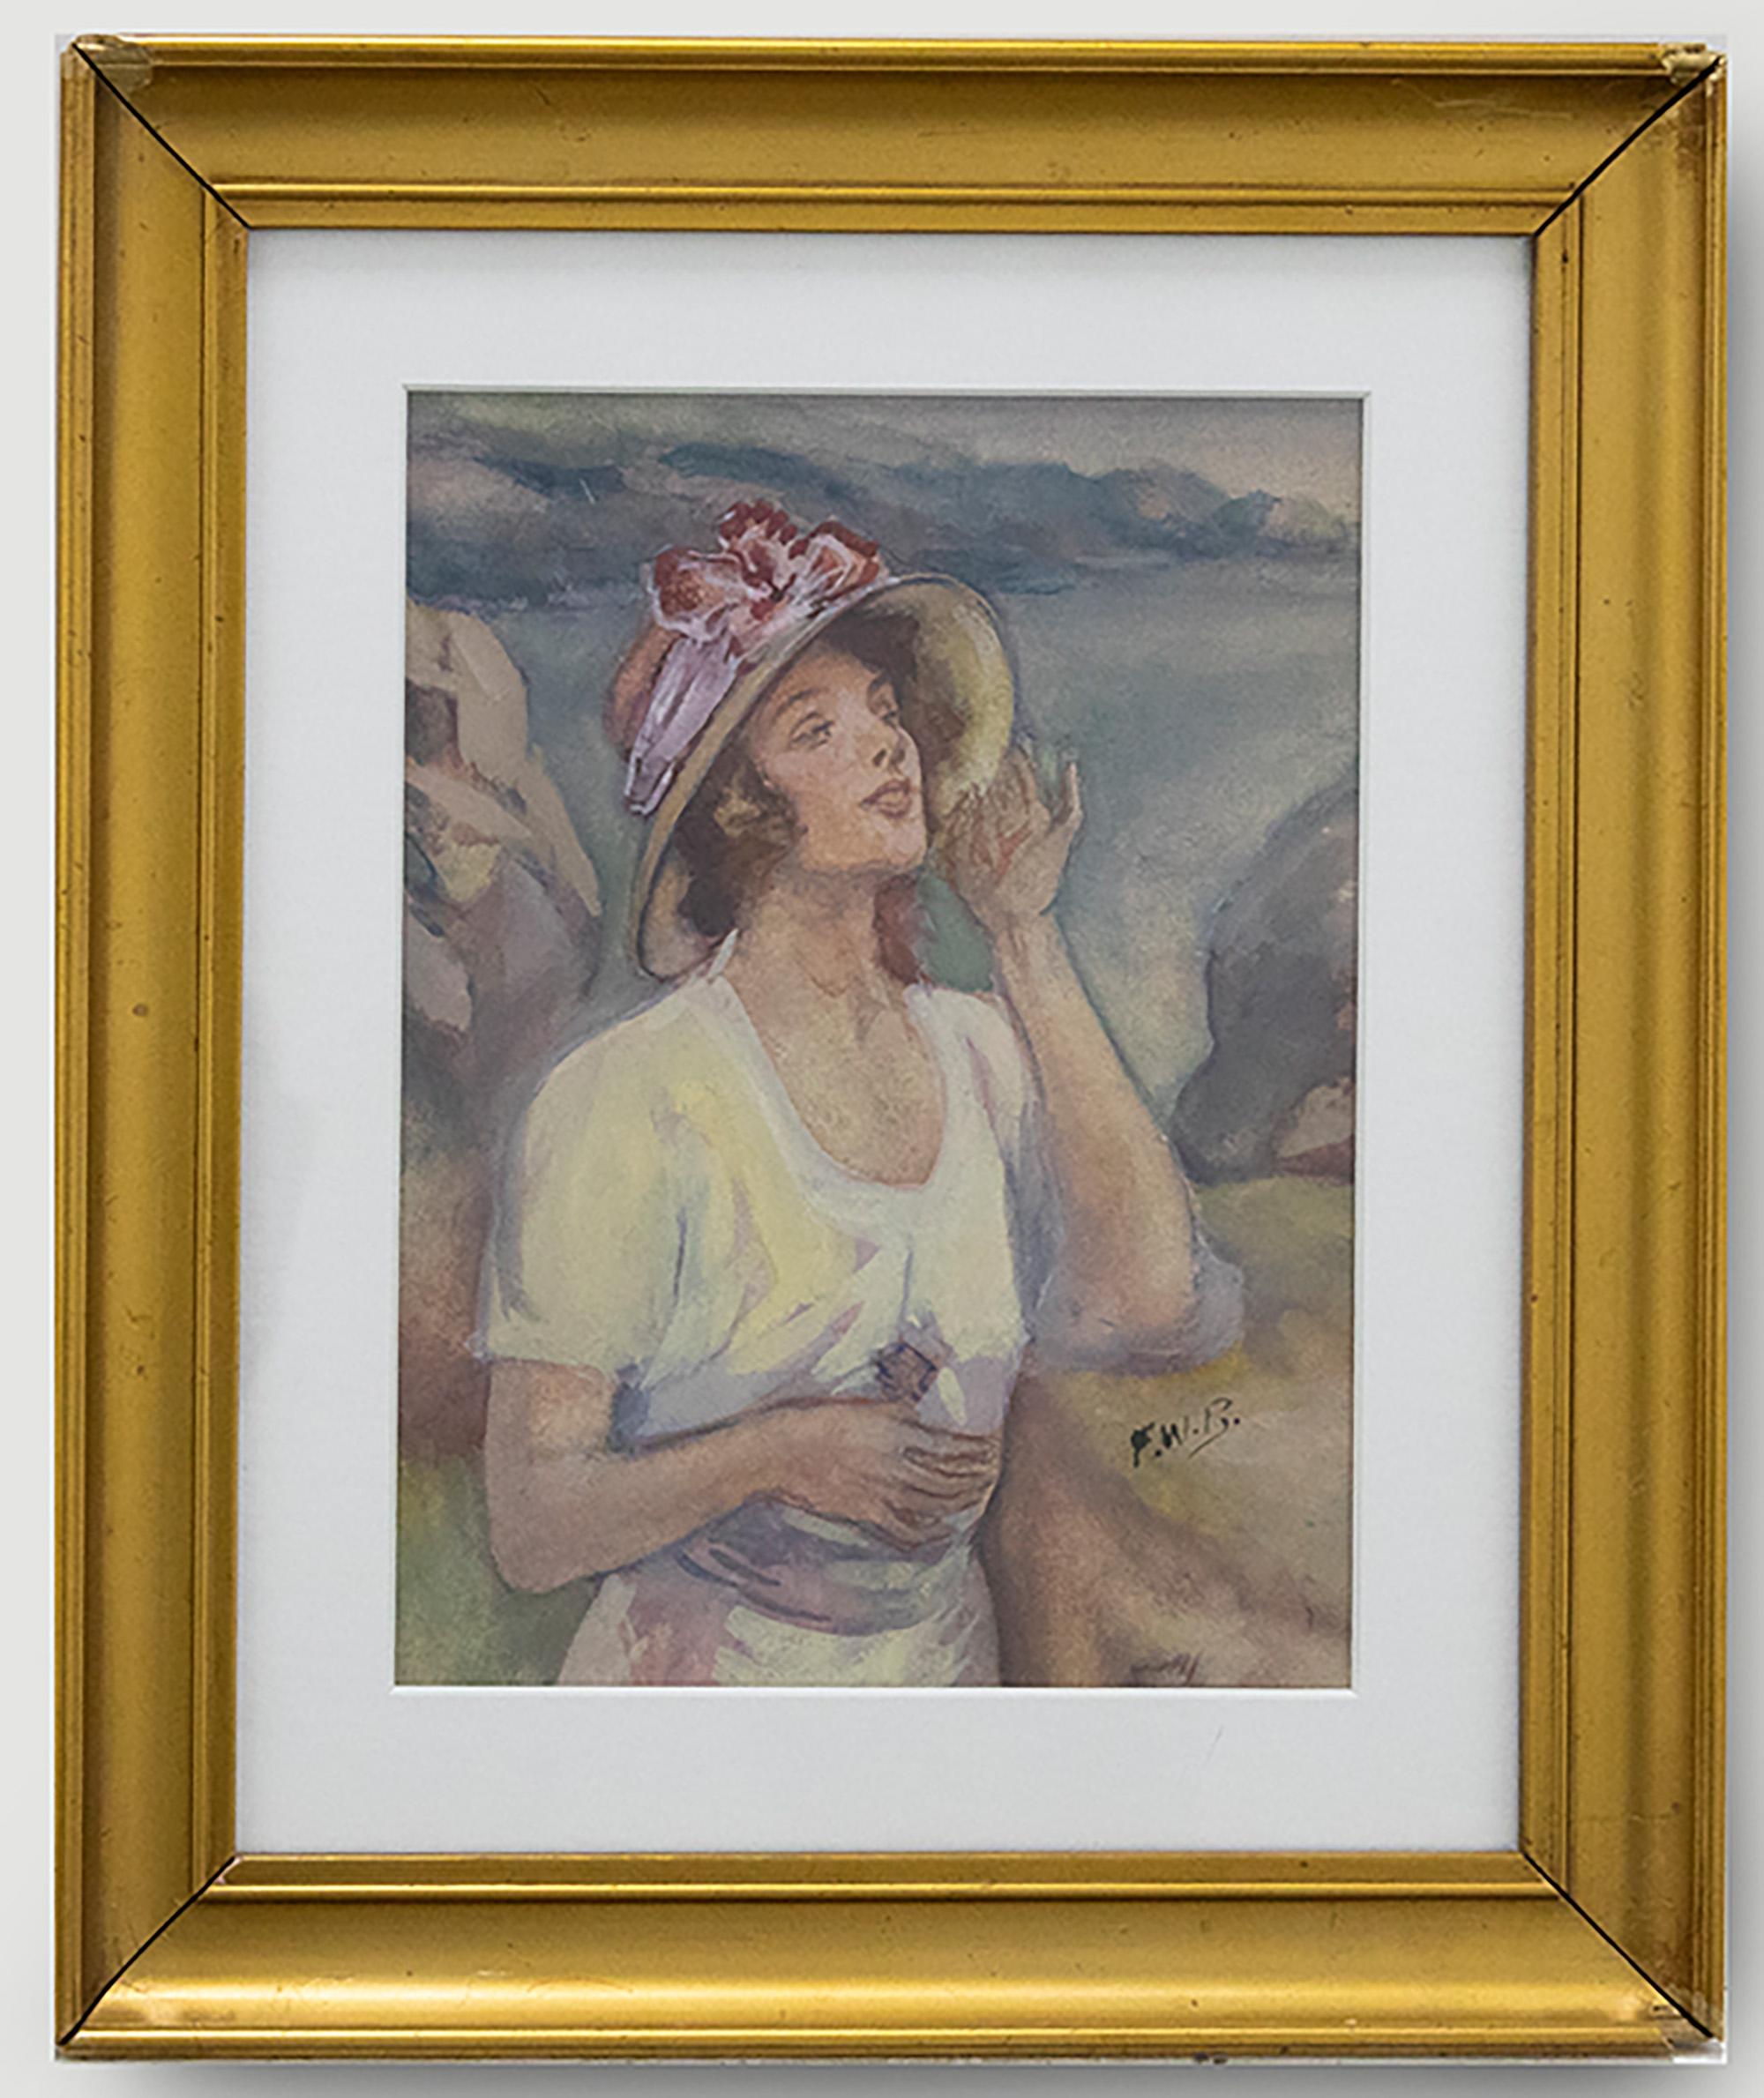 A pretty portrait of a young woman on a rocky beach. She wears a simple linen dress and pink hat. Presented in a gilt effect frame. Signed with initials. On watercolour paper.